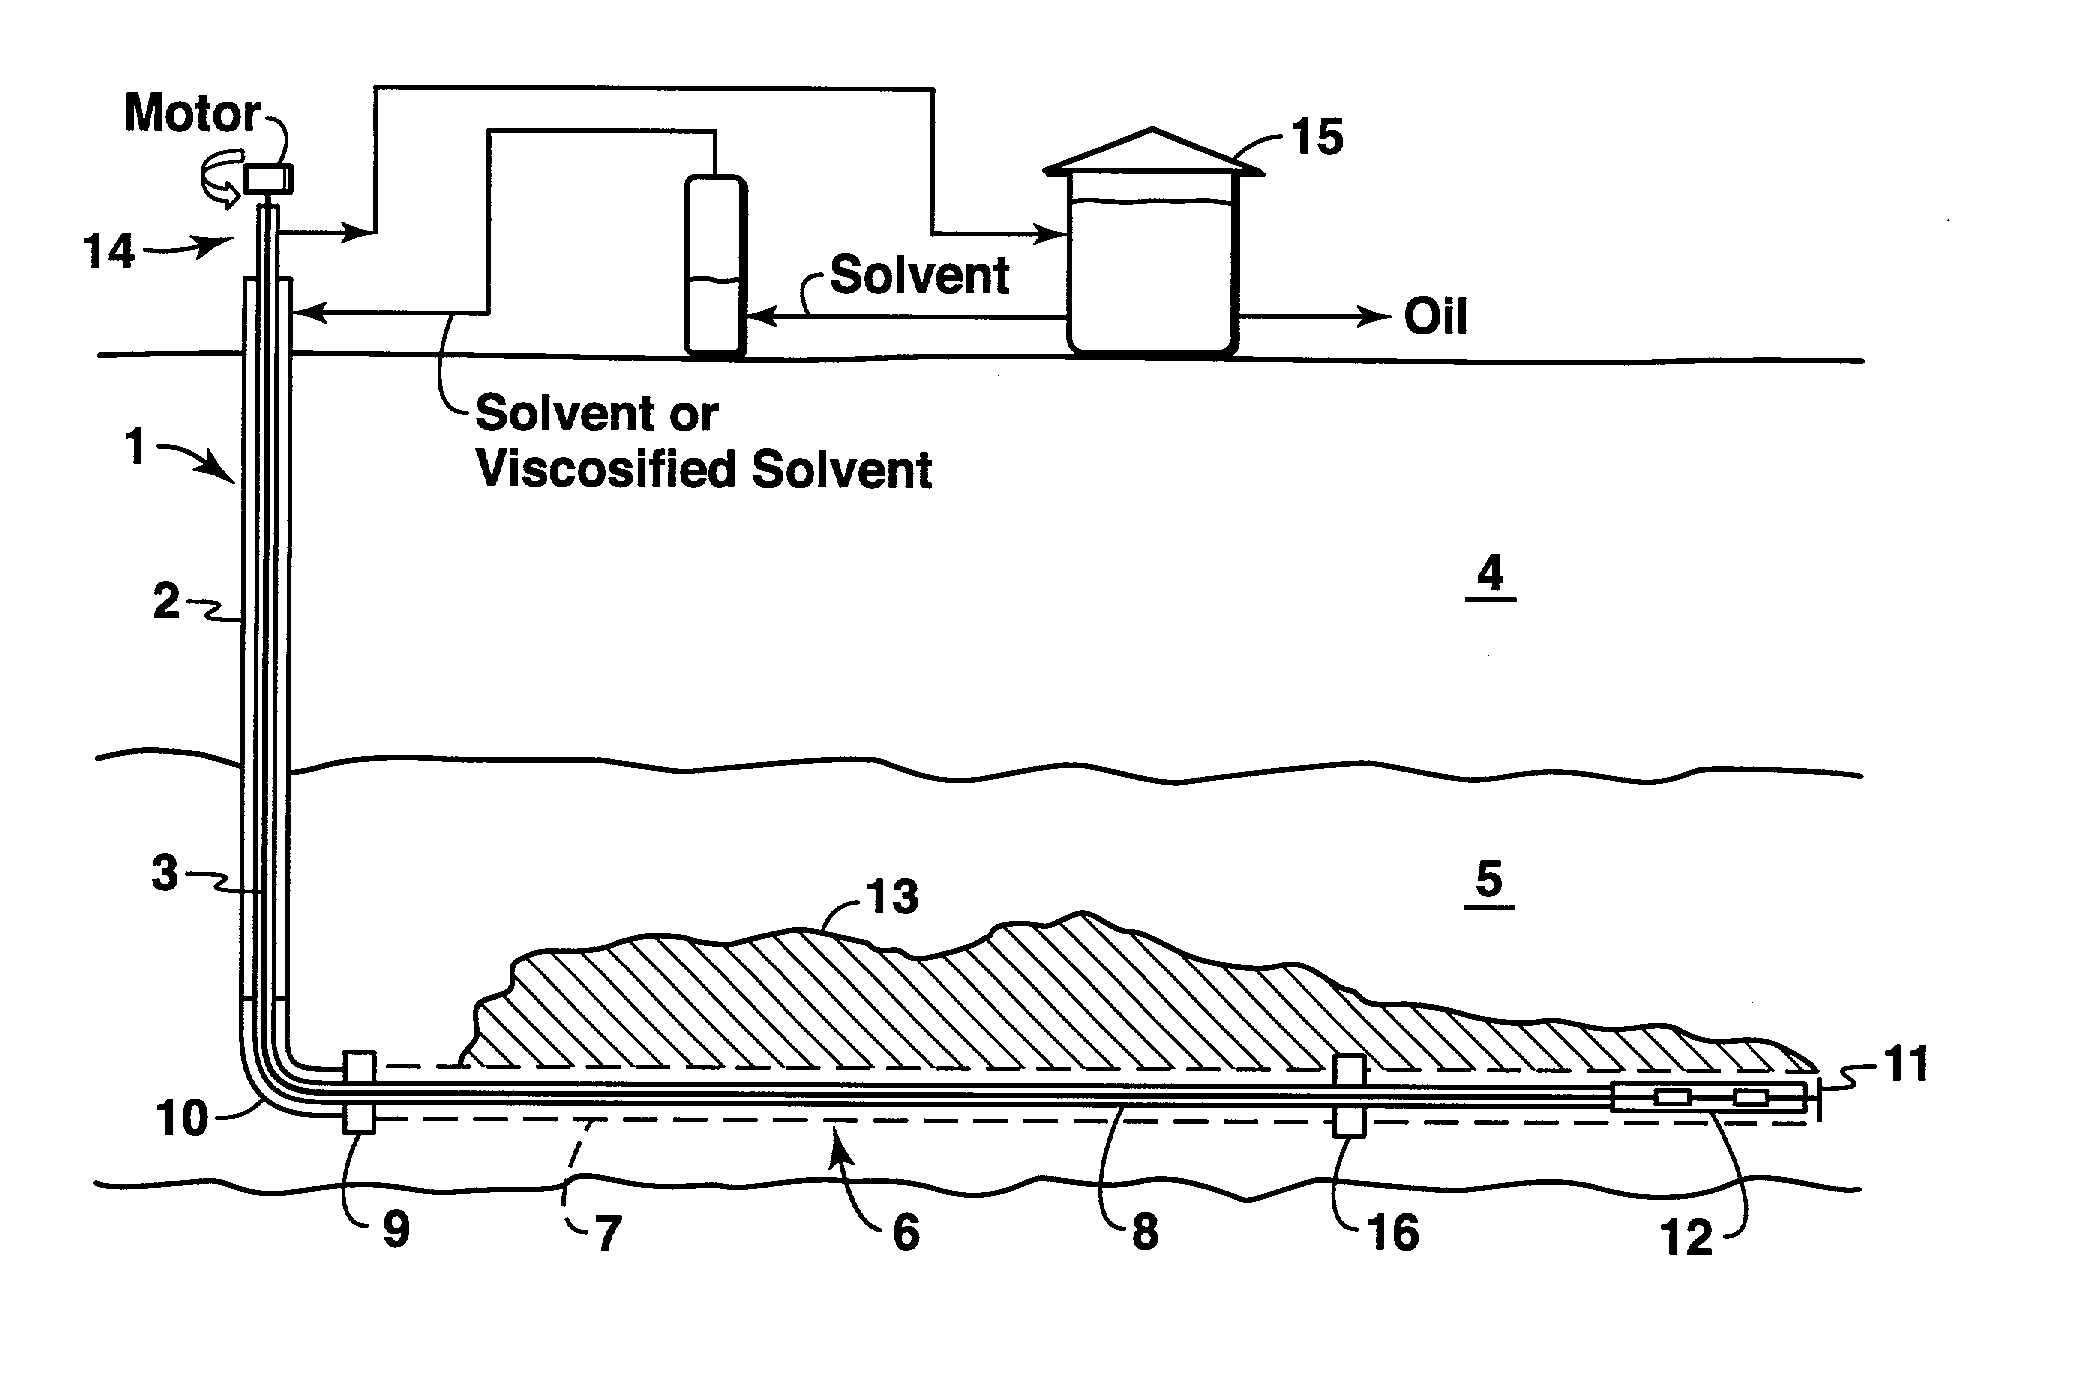 Cyclic solvent process for in-situ bitumen and heavy oil production